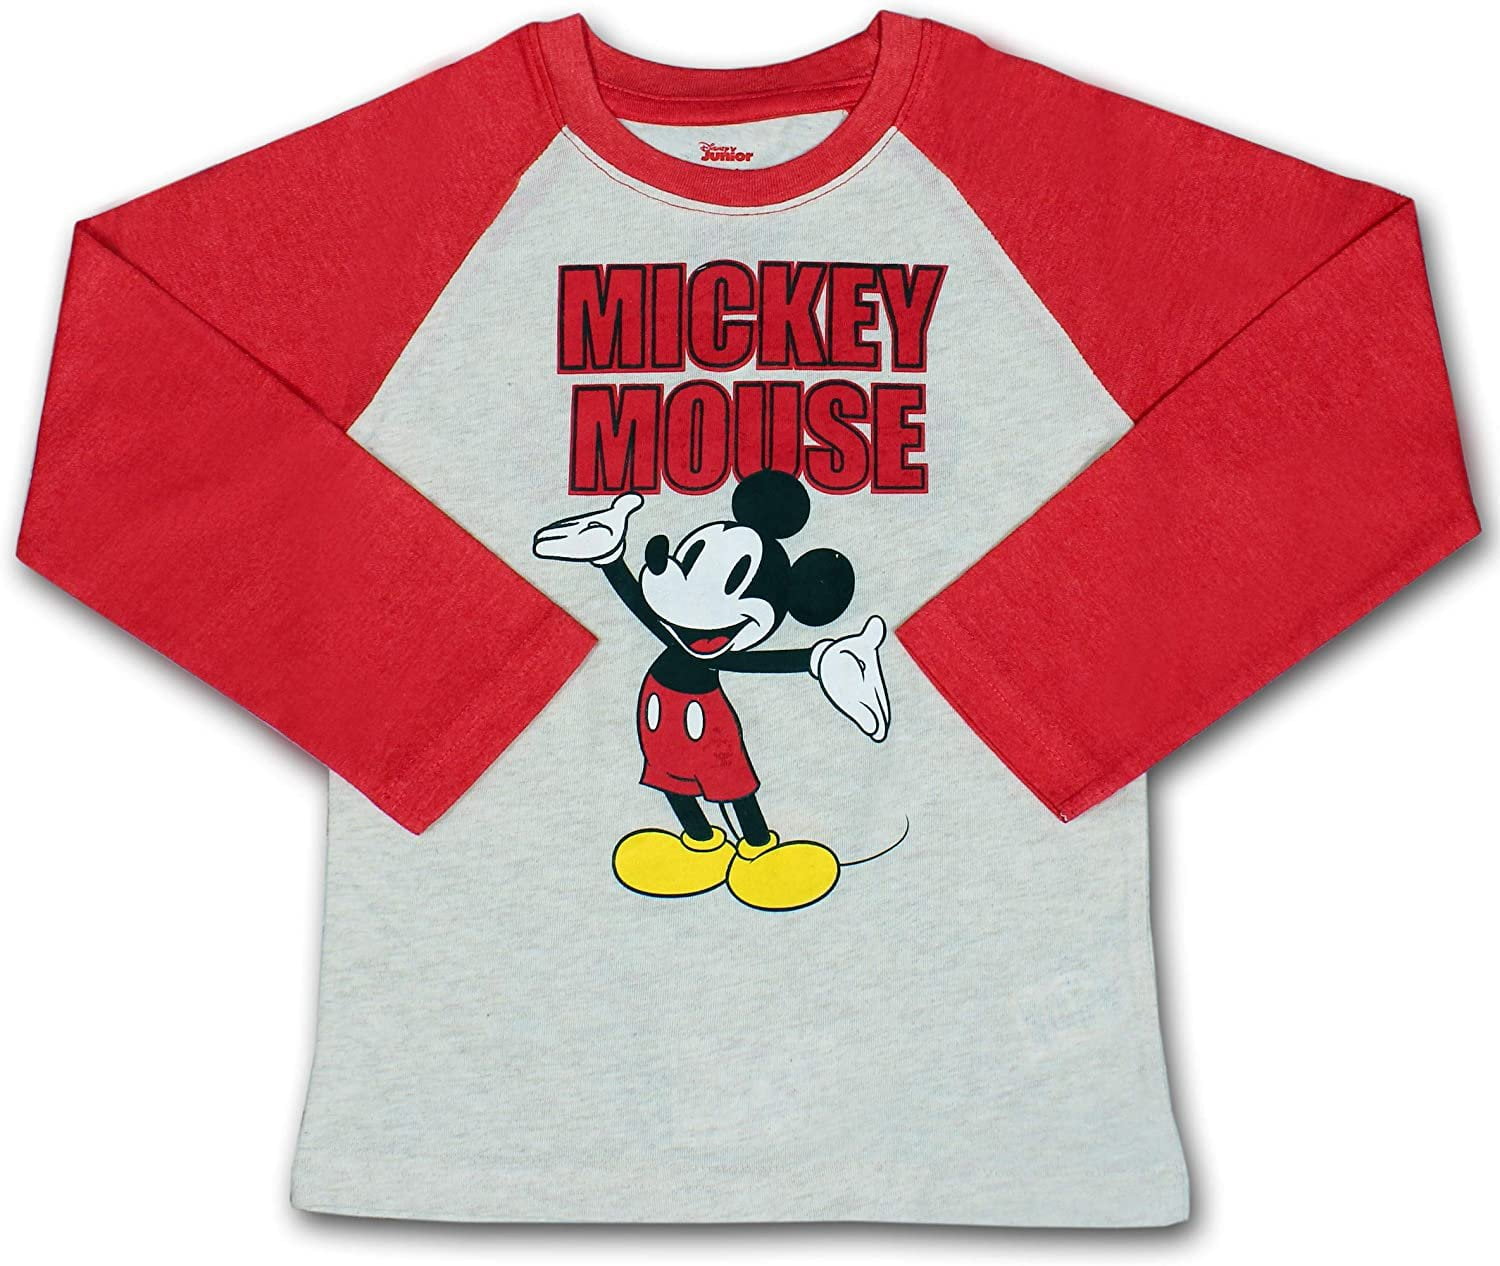 Boys Toddlers Mickey Mouse Cartoon Print T Shirt Kids Casual Top 12 mths Only 